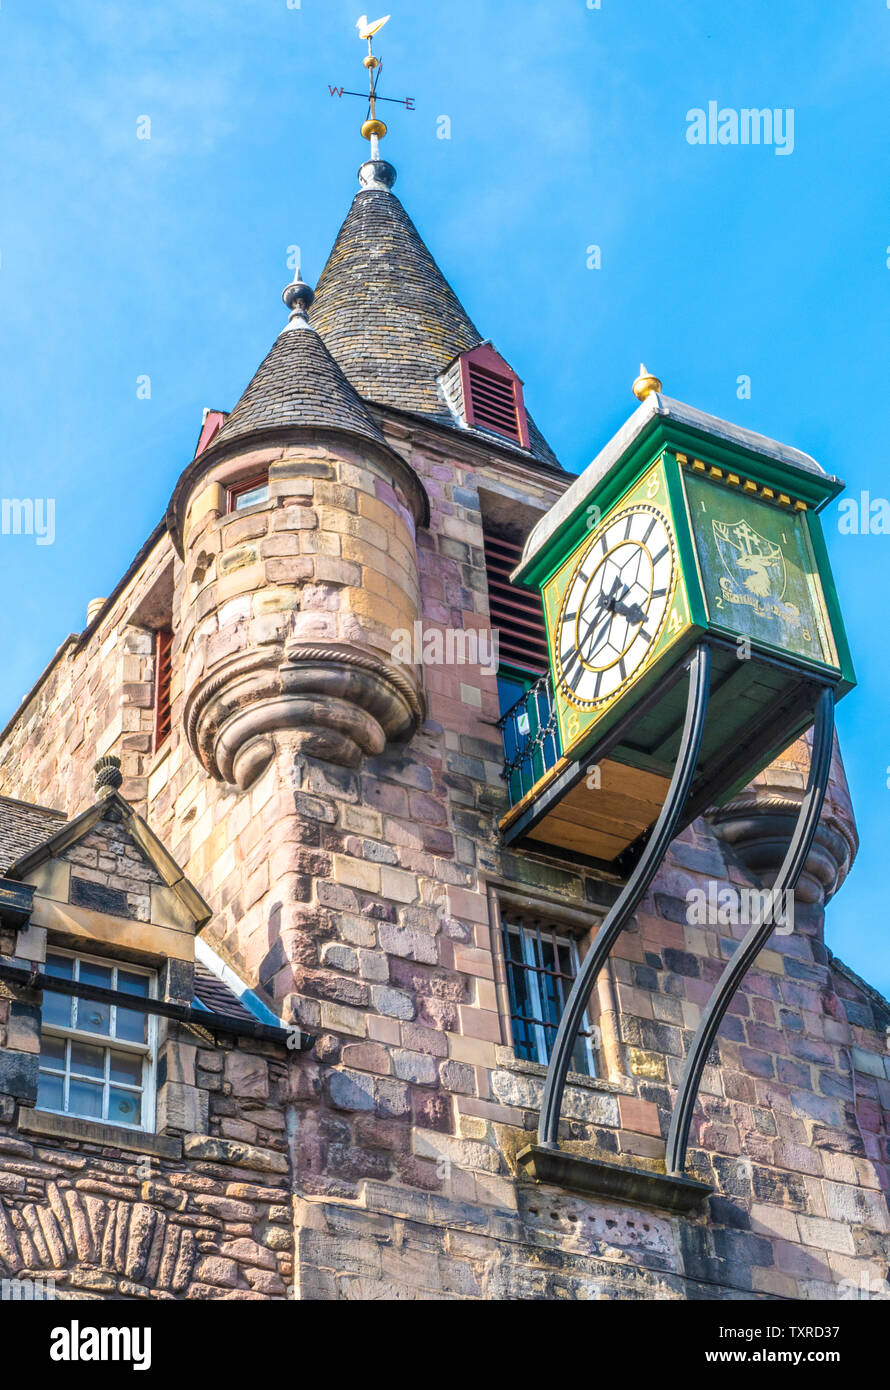 Canongate tolbooth clock and tower - part of a historic landmark, built in 1591 as the centre of administration and justice. Edinburgh, Scotland, UK. Stock Photo